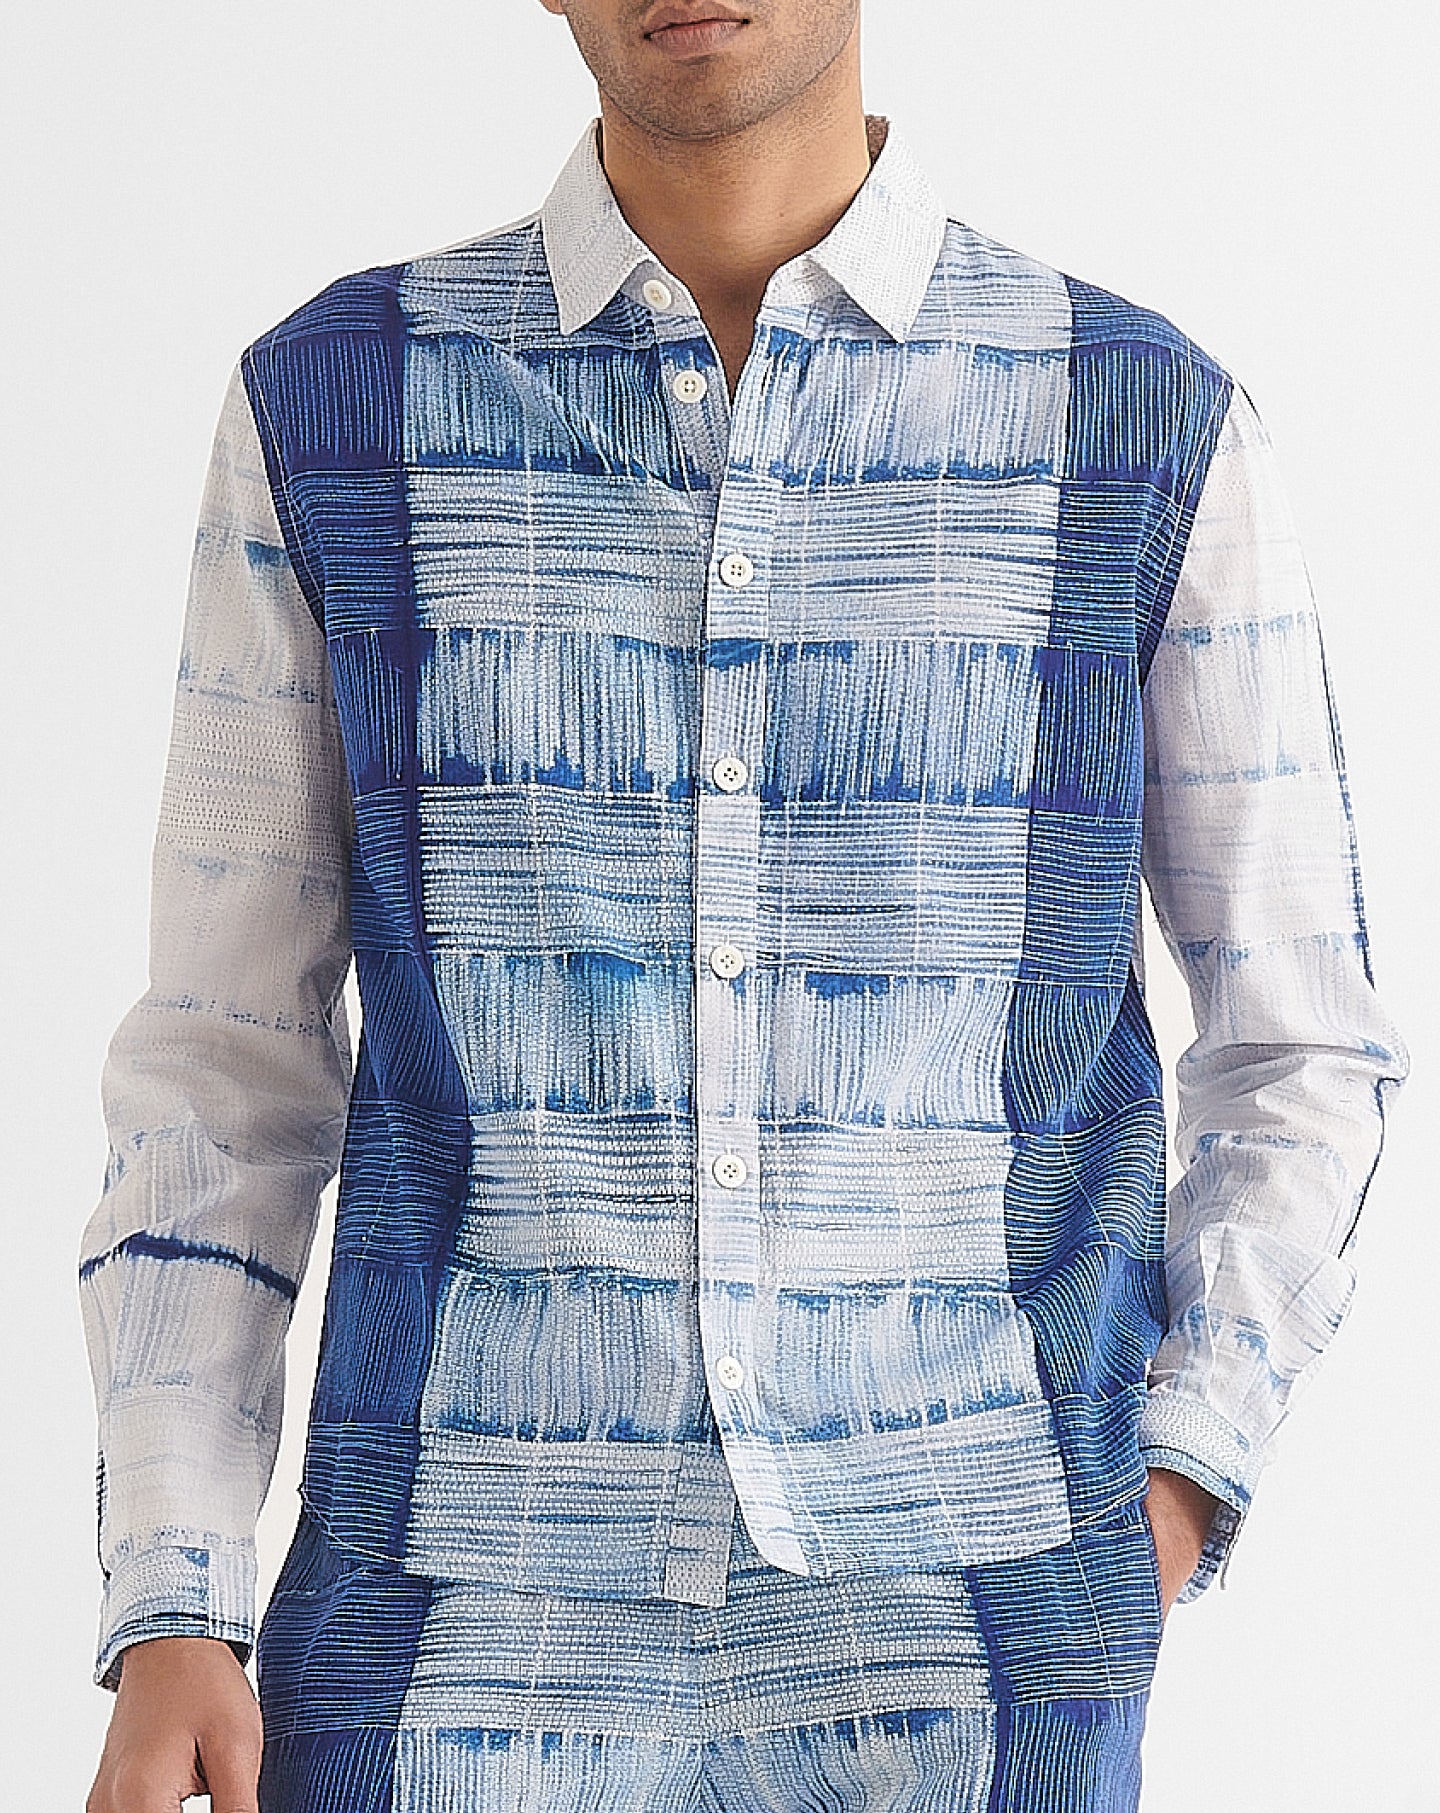 Holbox Relaxed Fit Shirt in White and Blue Tie-Dye